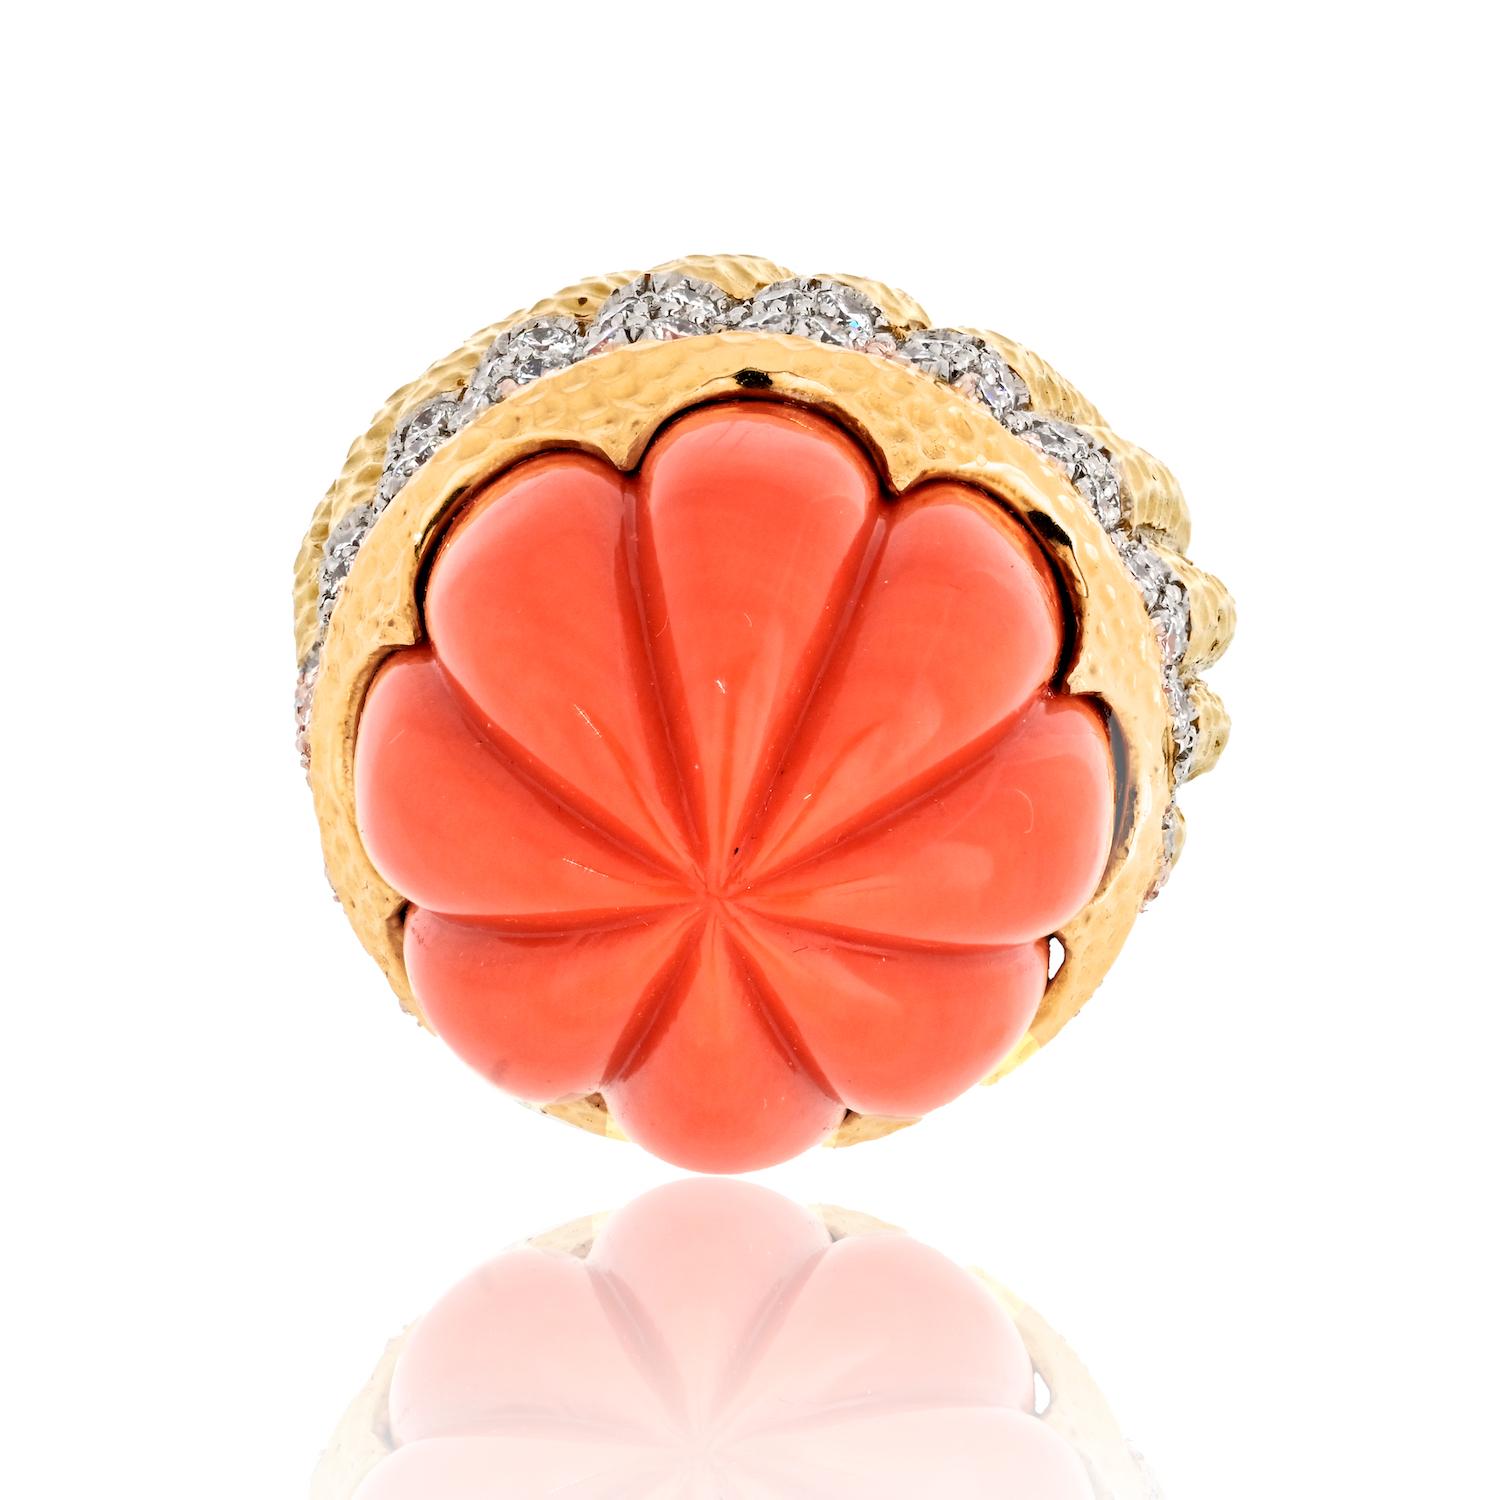 Modern David Webb Bombe Platinum & 18k Yellow Gold Fluted Coral Ring For Sale